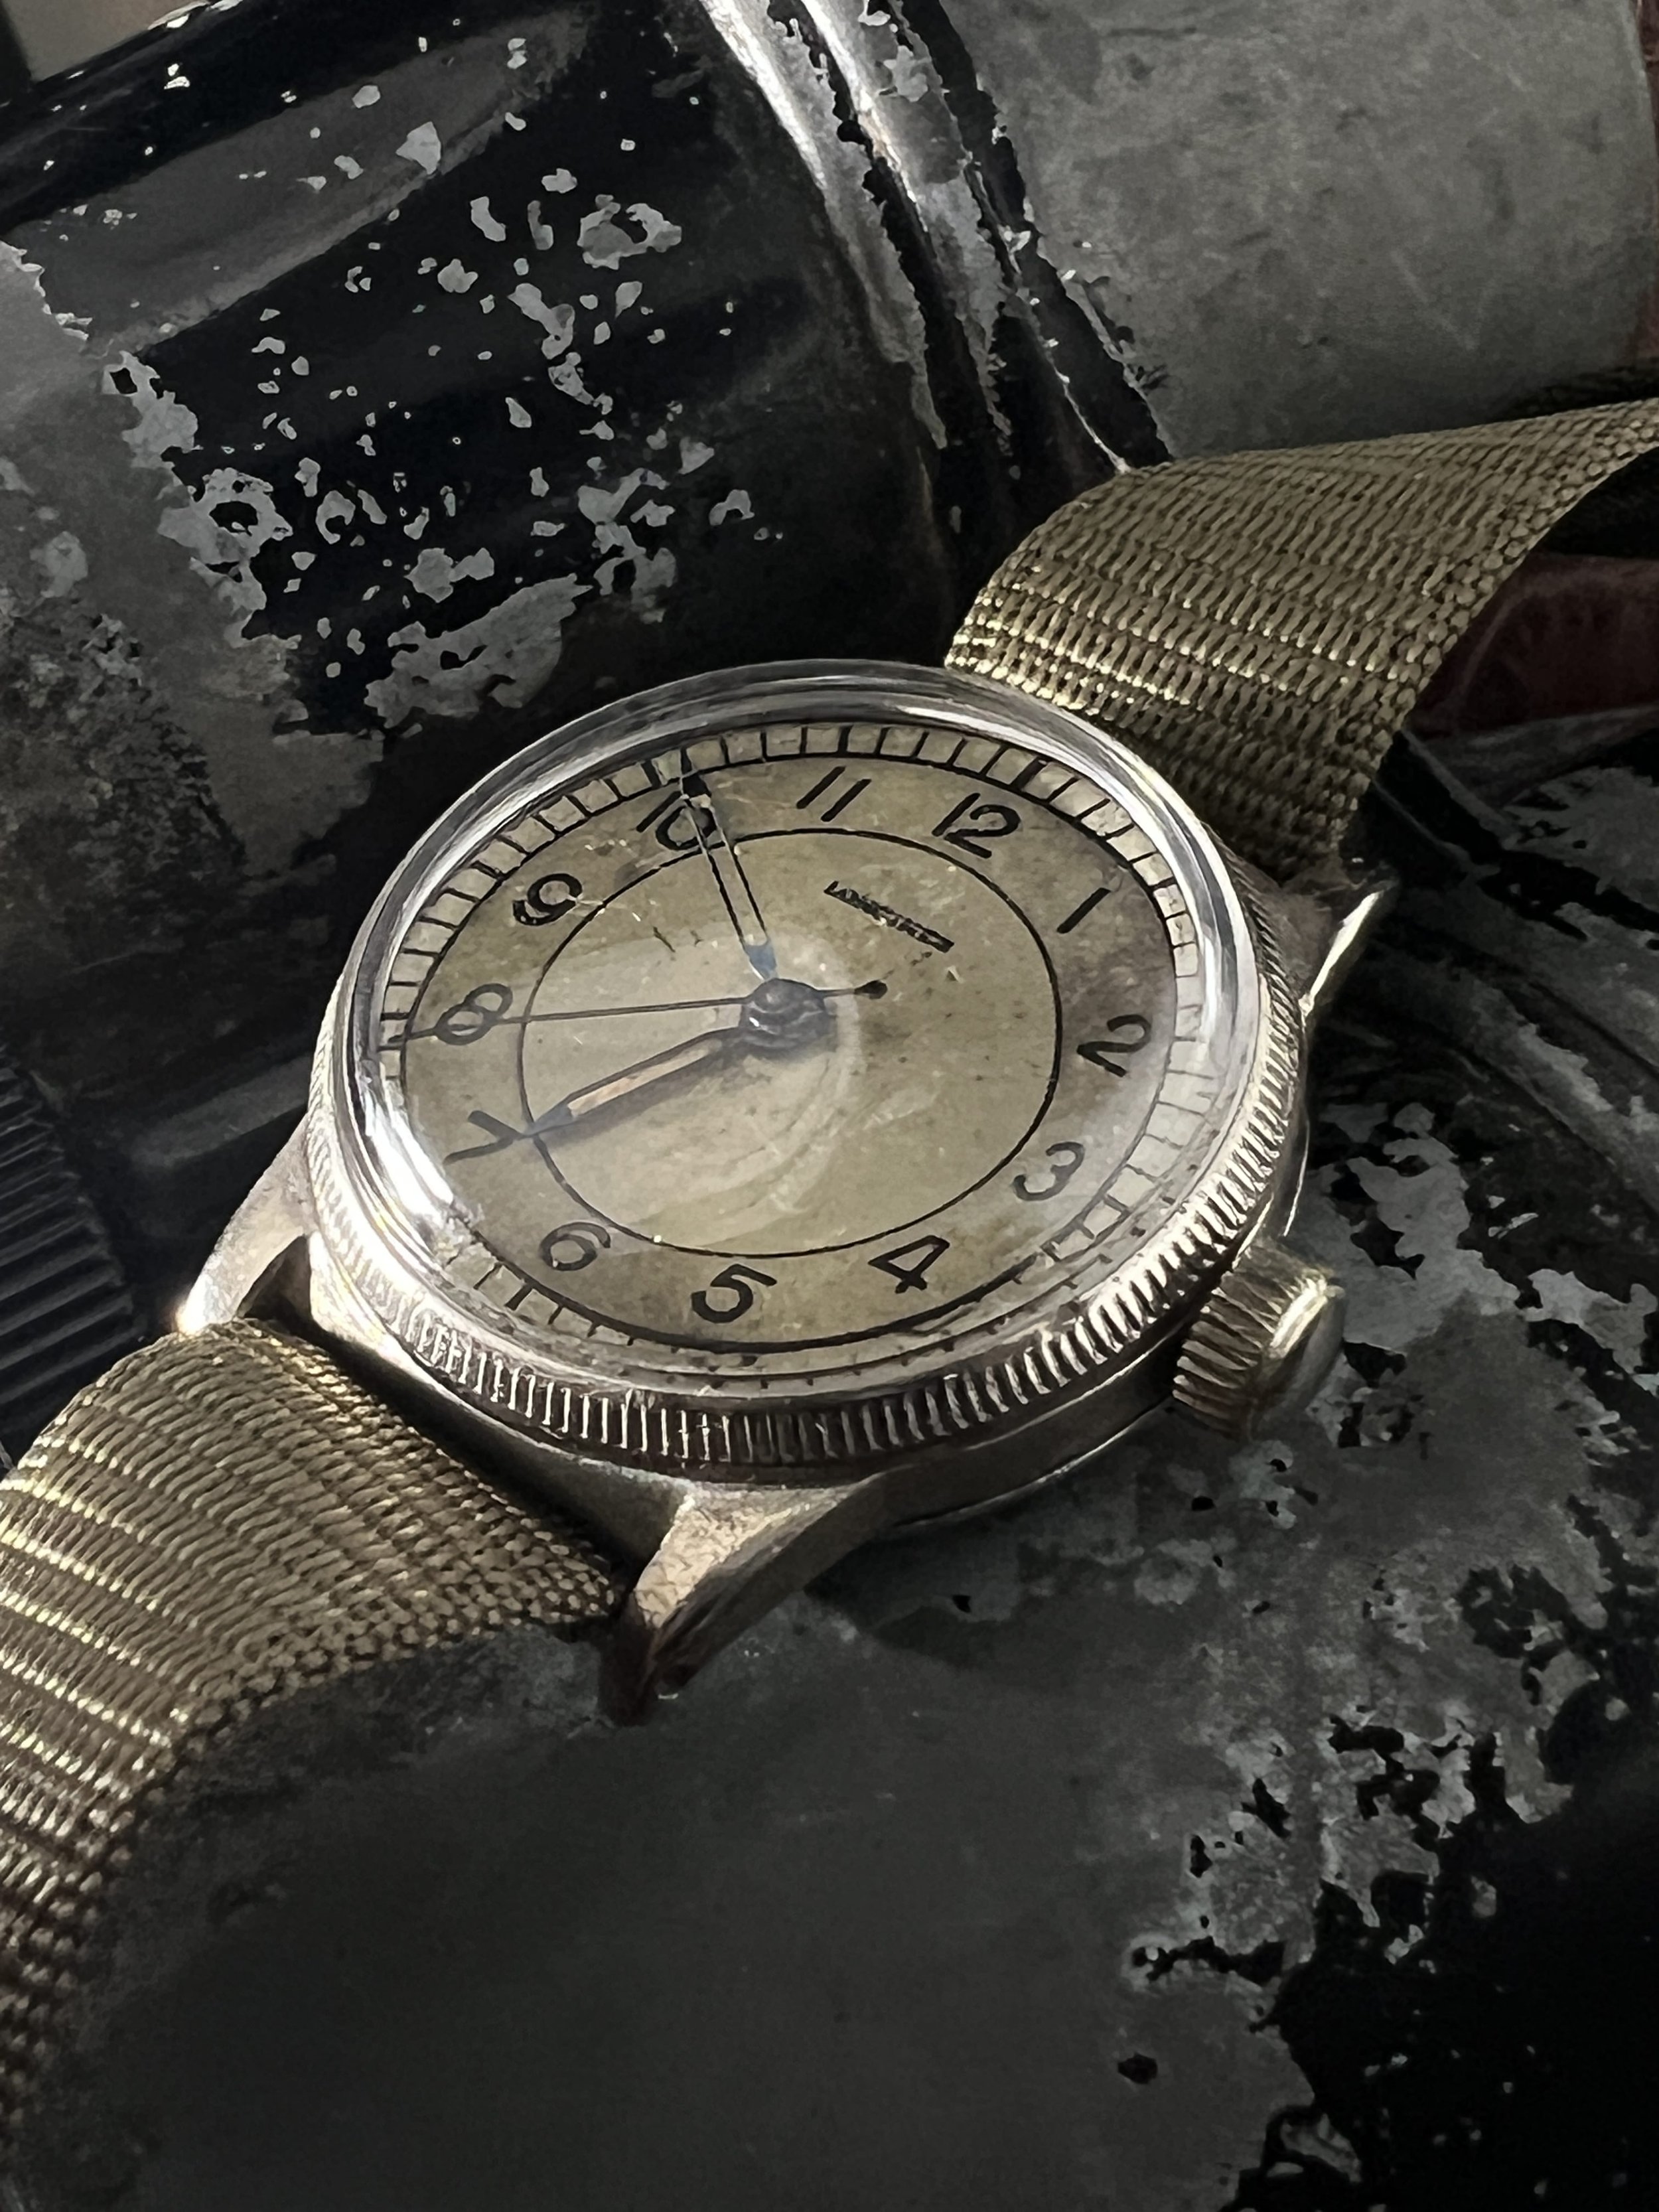 WWII Longines Aviator Military Style — Cool Vintage Watches